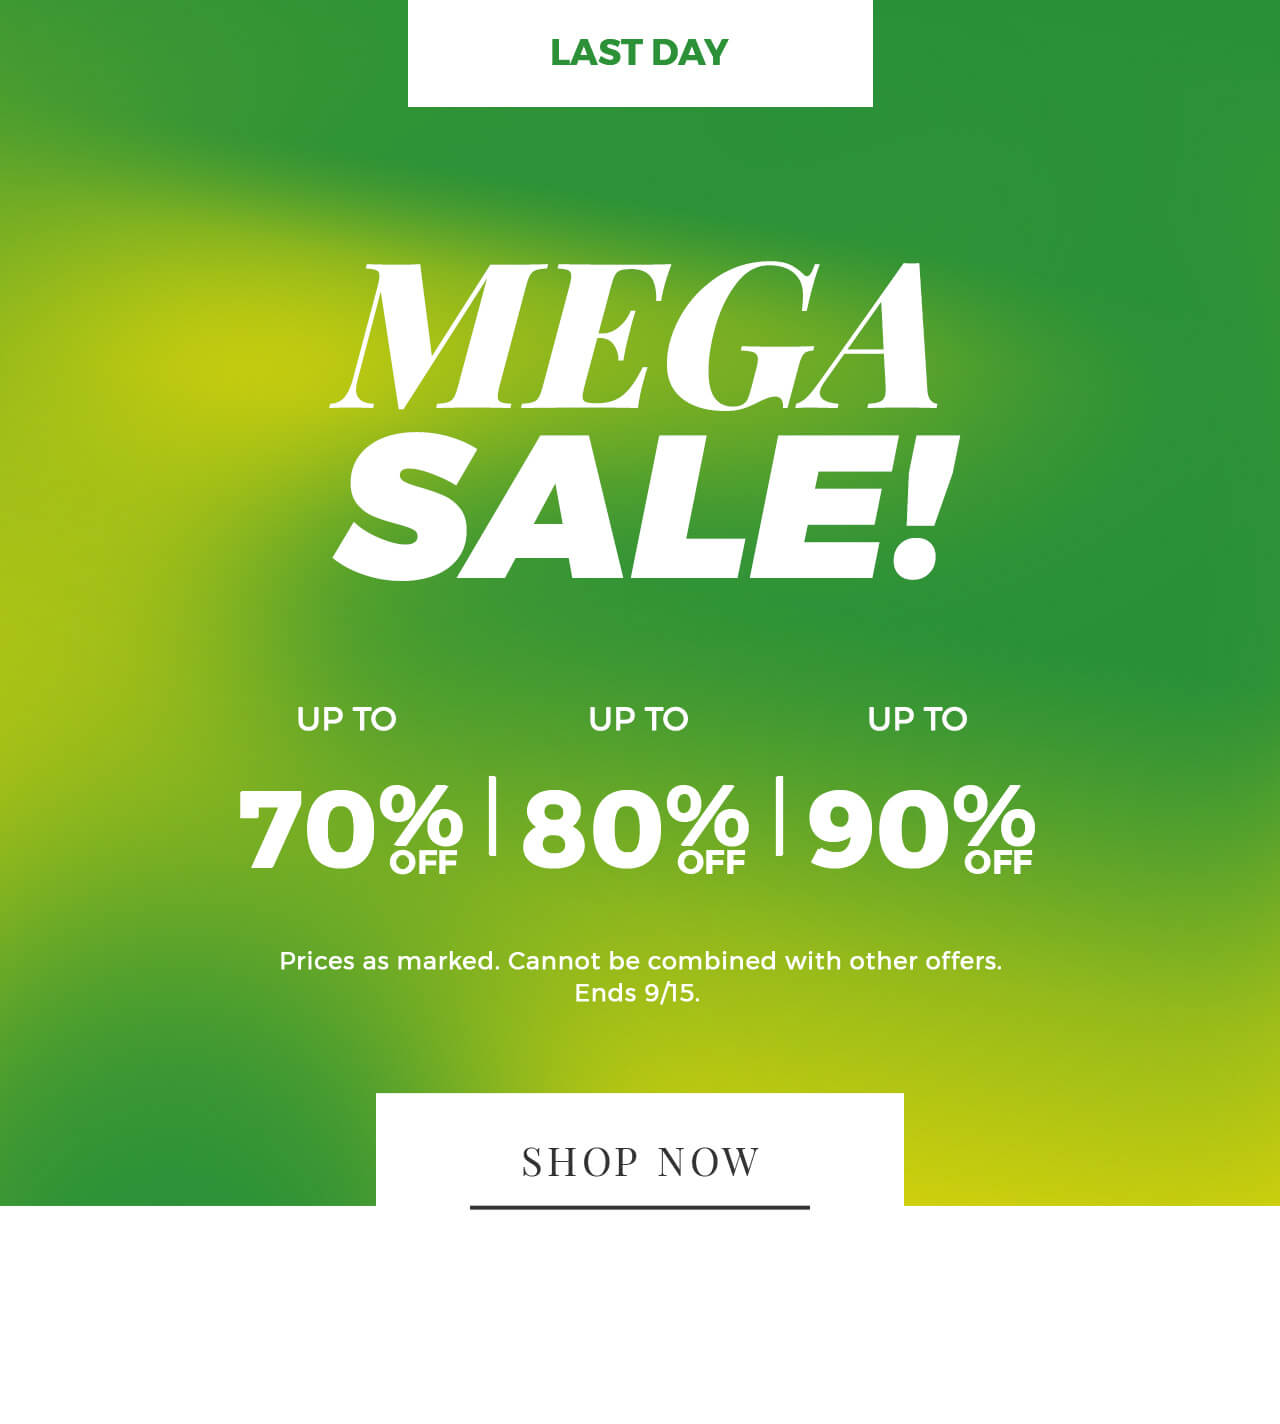 LAST DAY MEGA SALE! UP TO UP TO V2o 70%180%190% Prices as marked. Cannot be combined with other offers. Ends 915. 